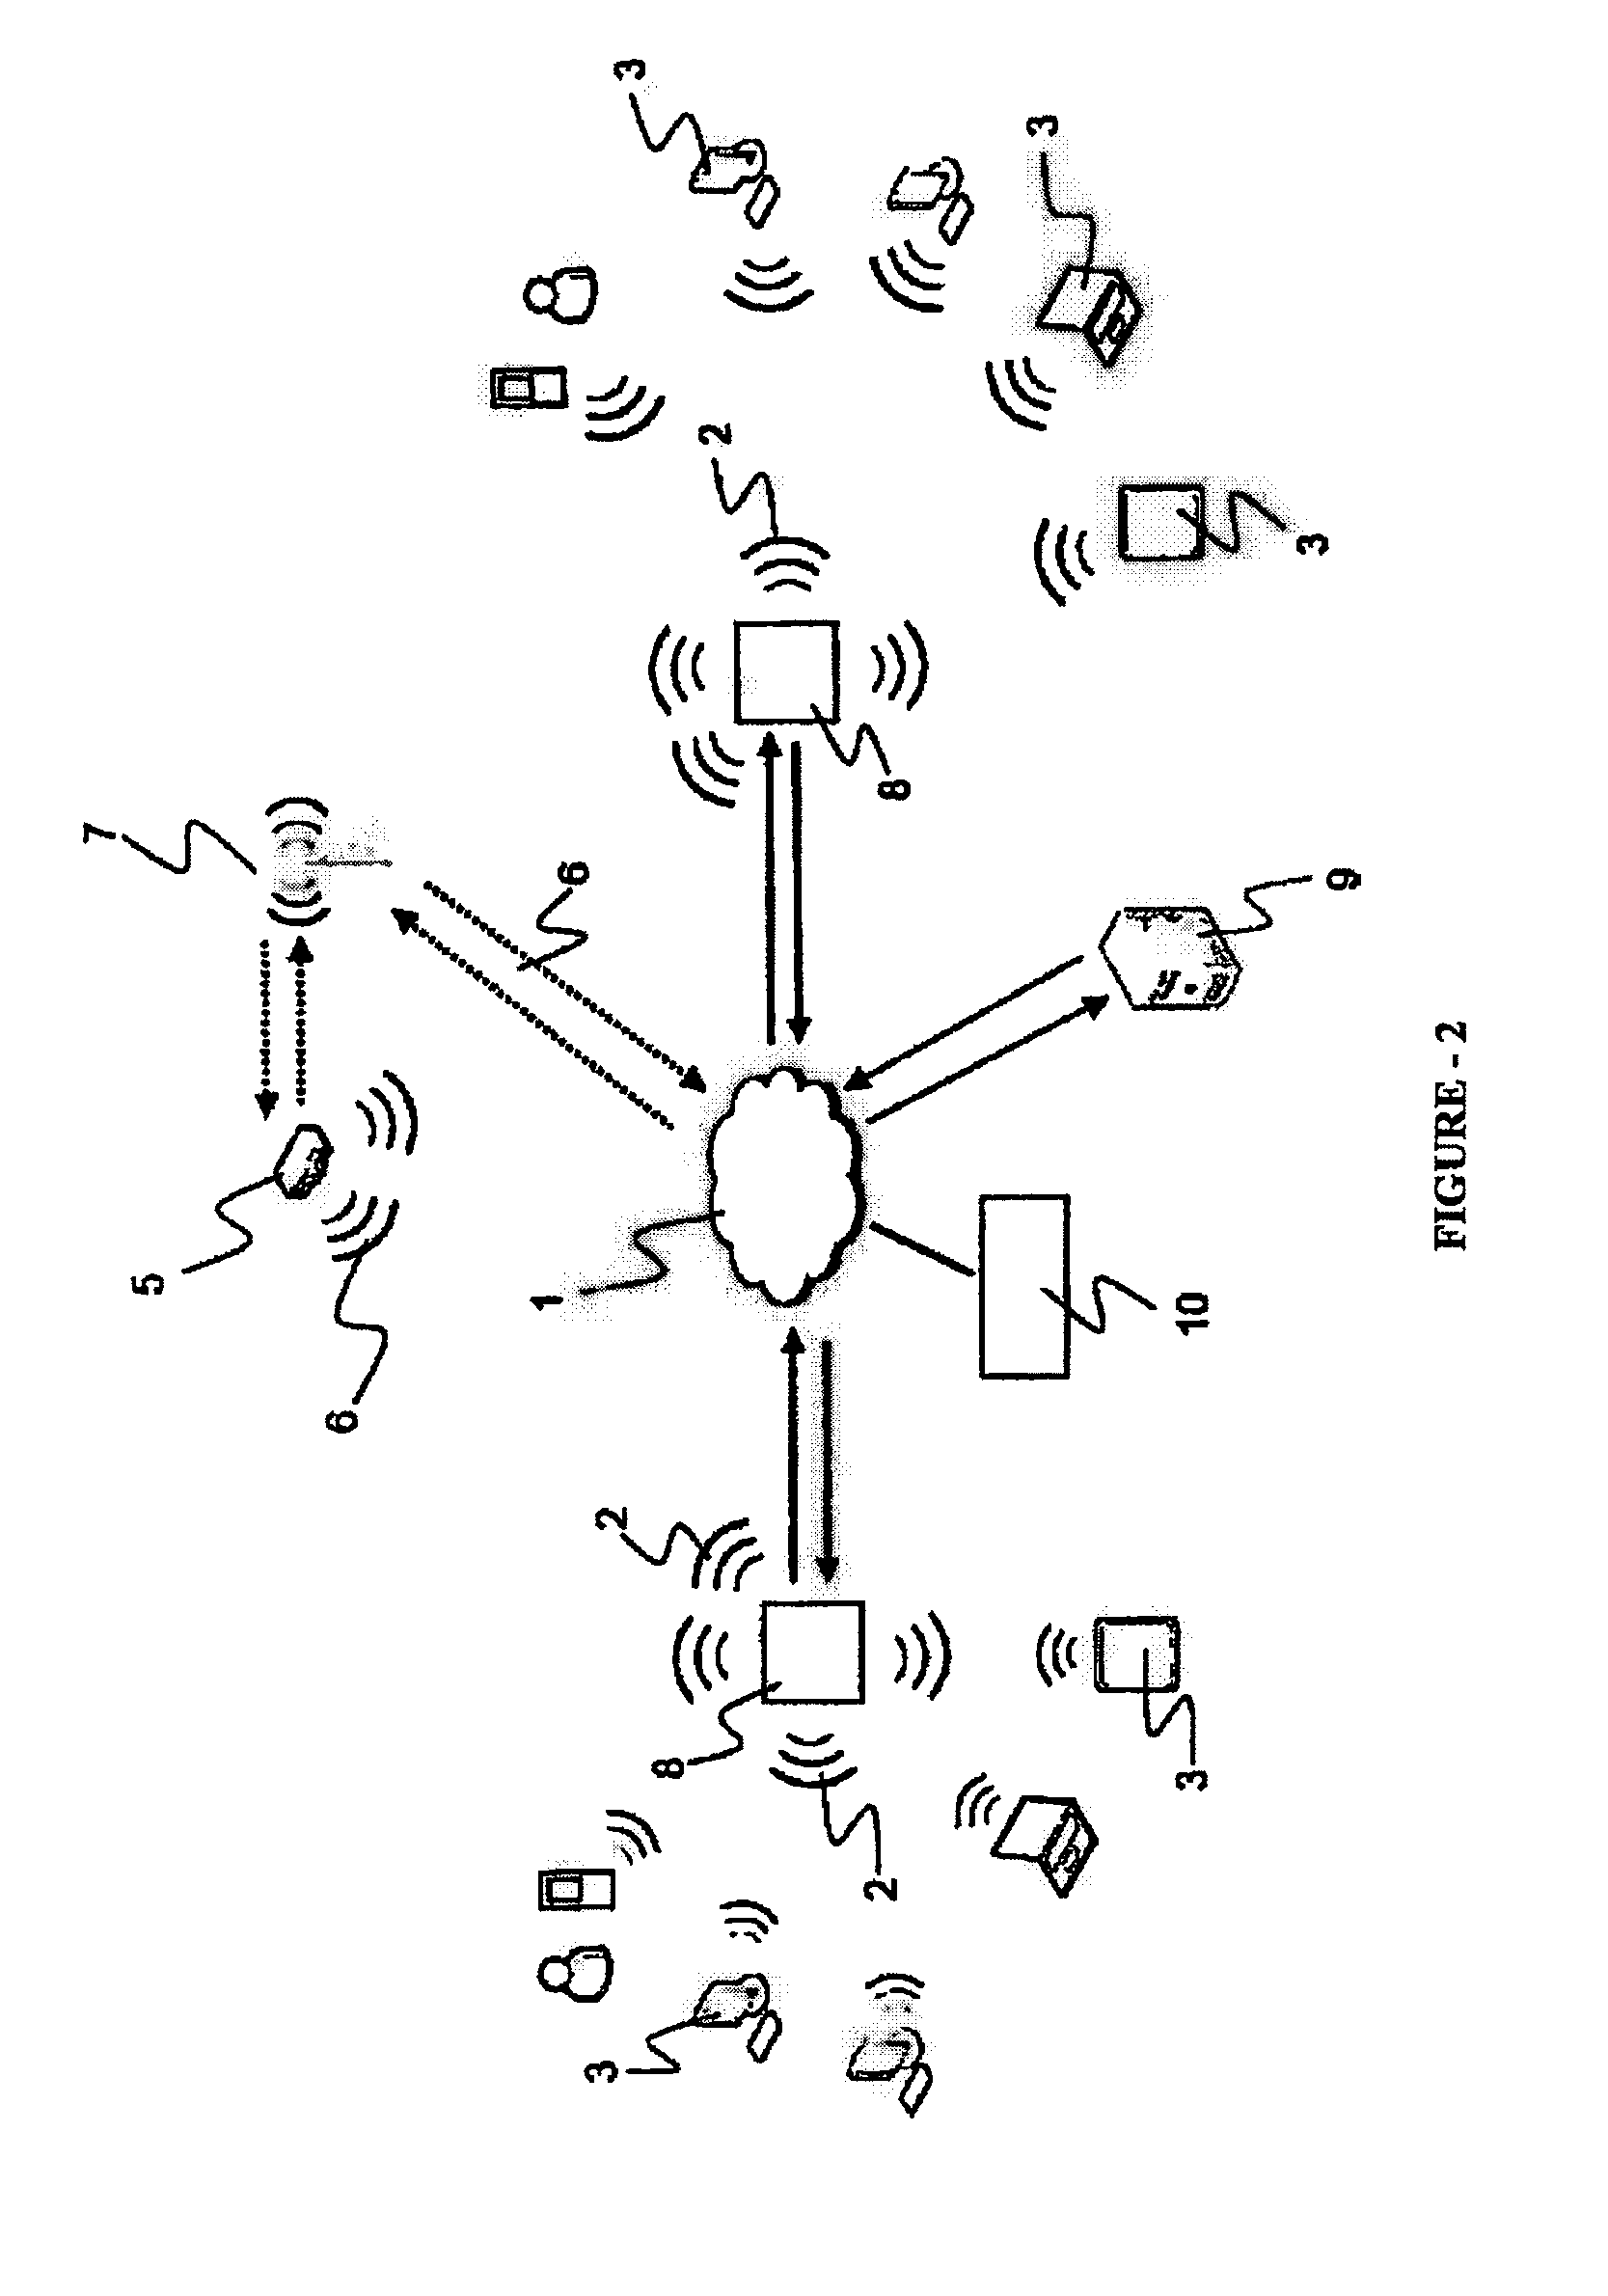 Method and device for monitoring and measurement of wi-fi internet services